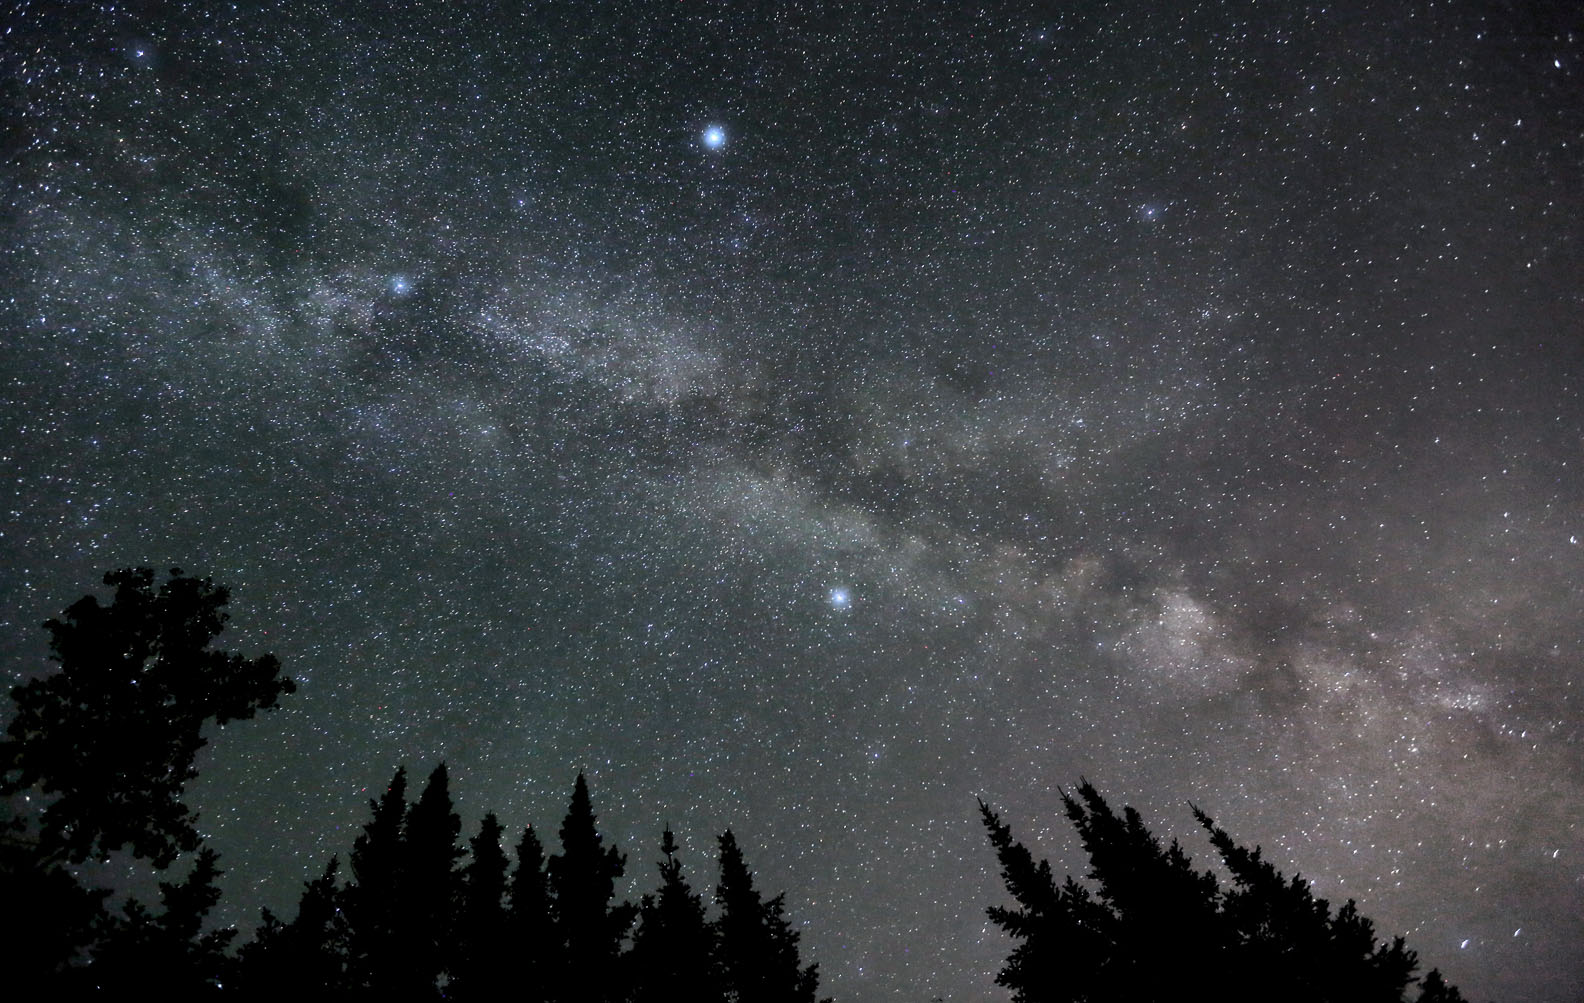 The Milky Way on a late September night offers an opportunity to contemplate the grand form of the galaxy. Credit: Bob King